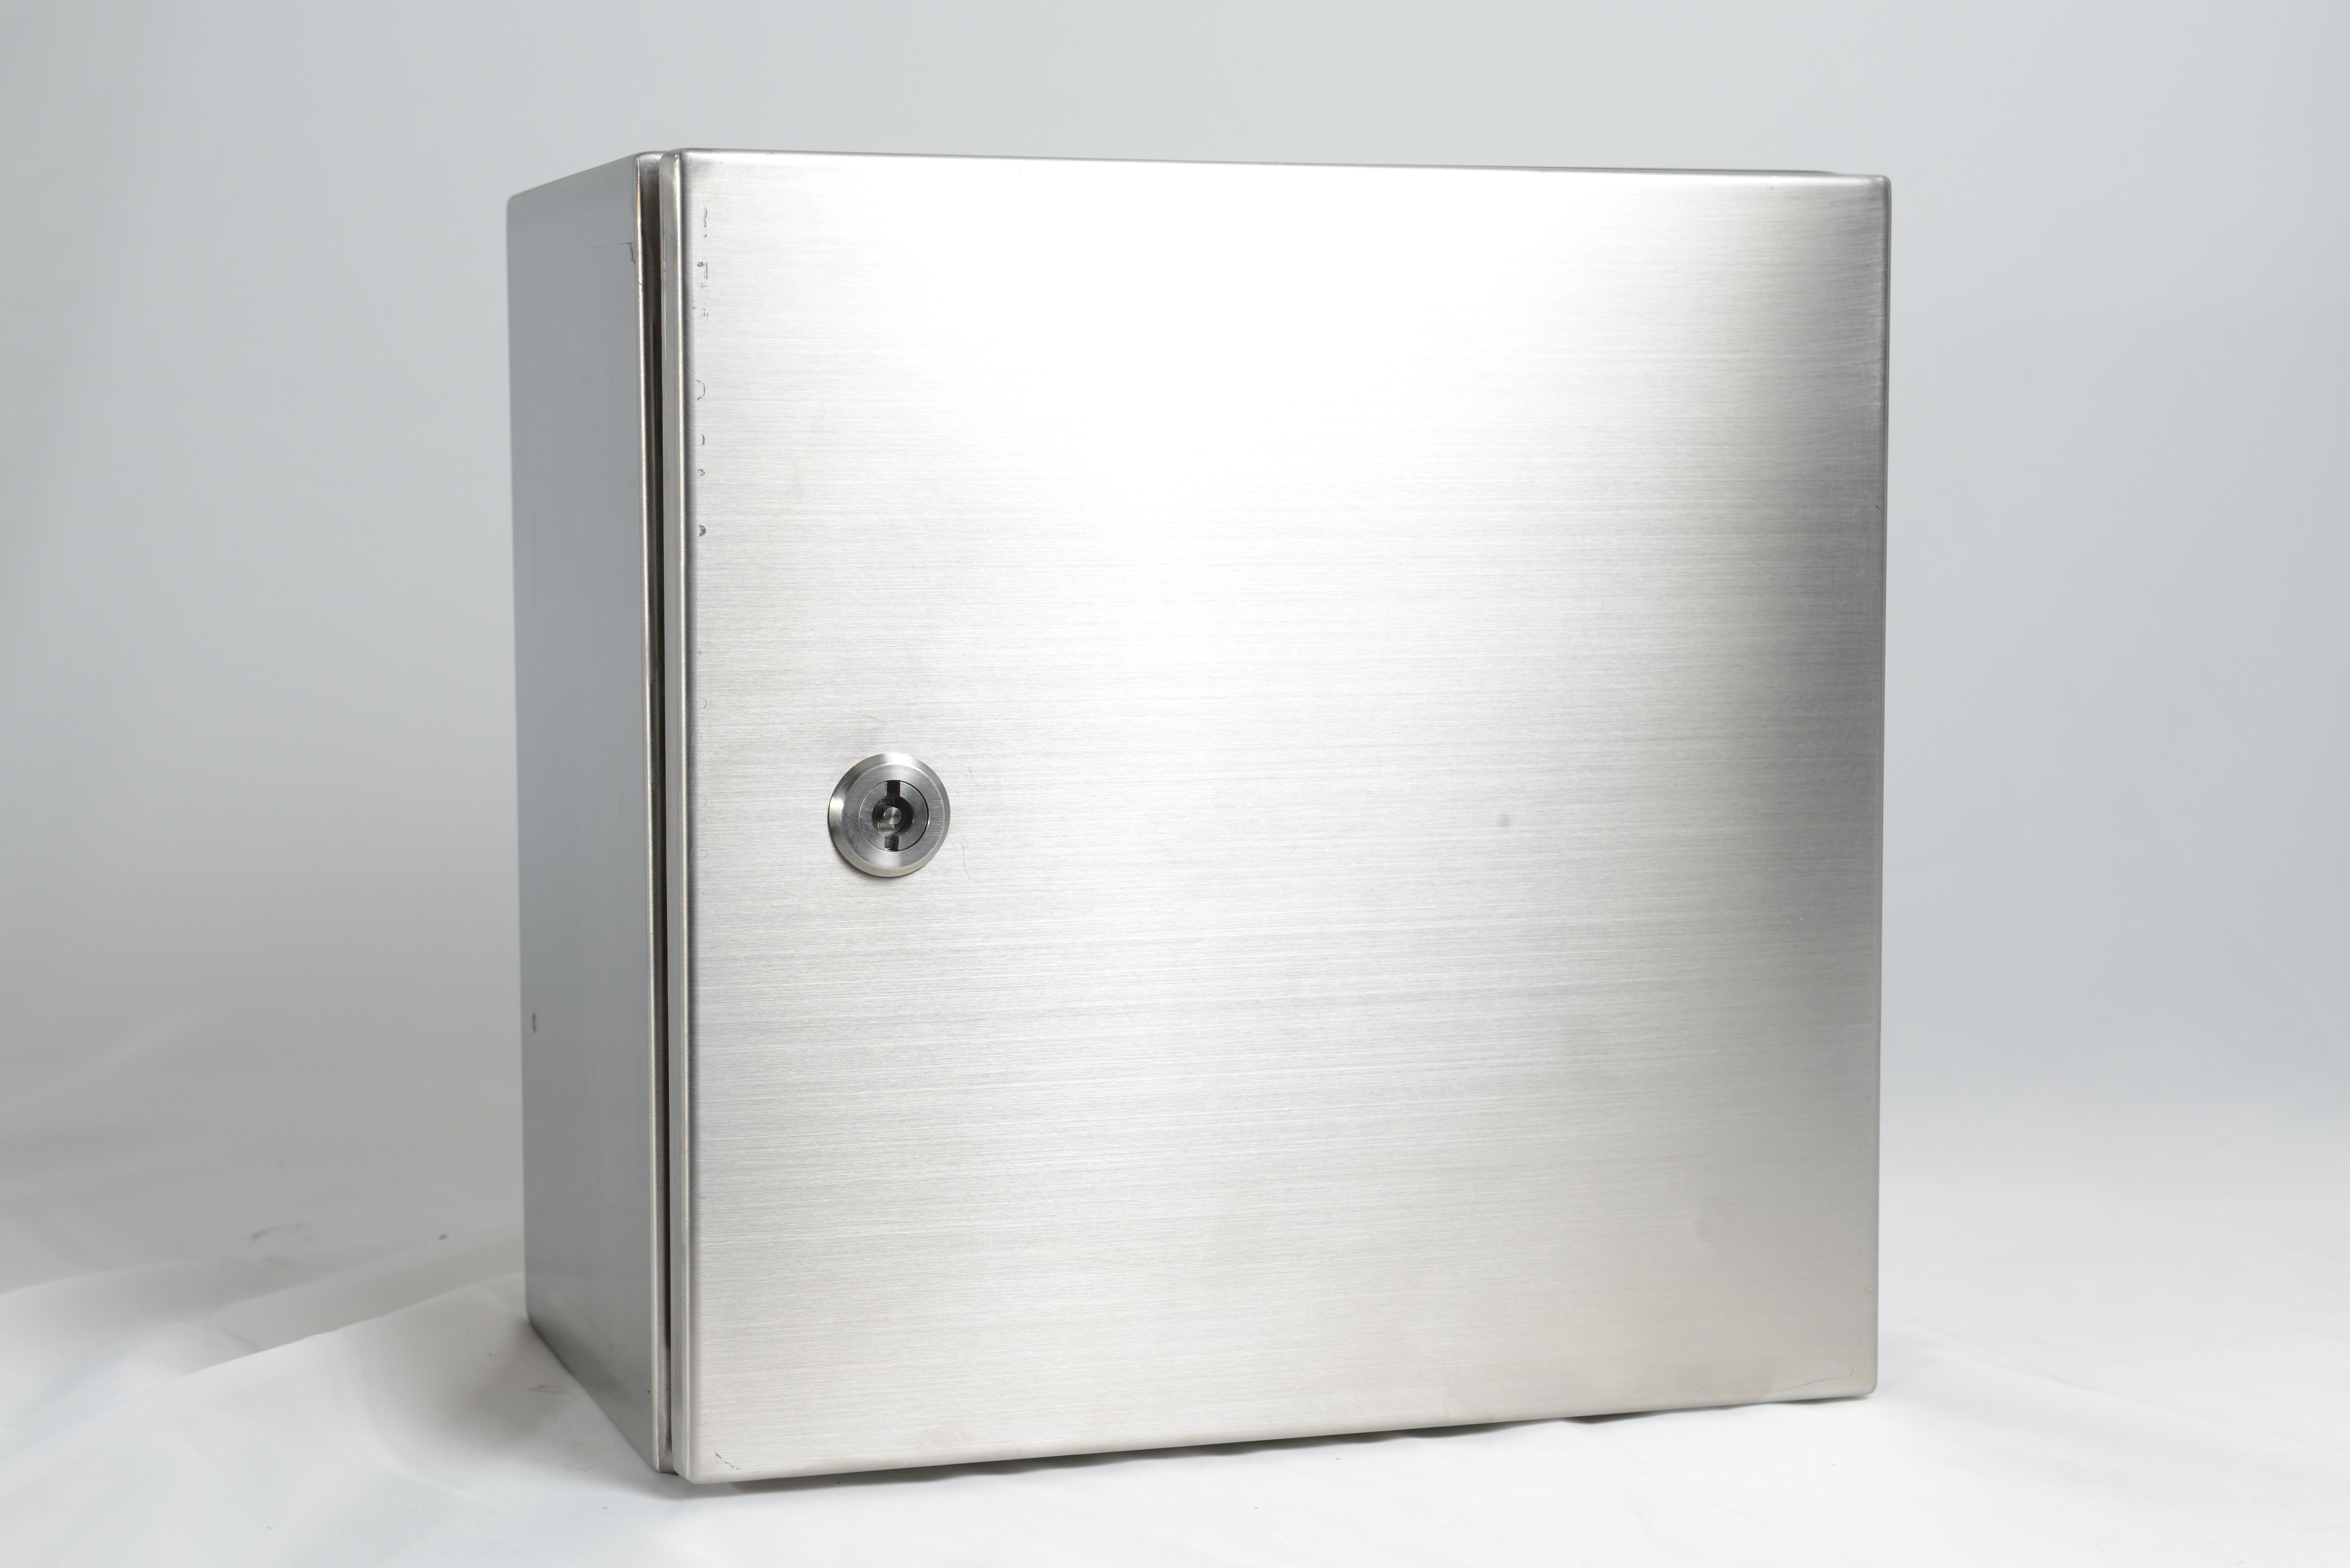 RCG stainless steel enclosure 316 grade 500x400x300mm - wall mounting